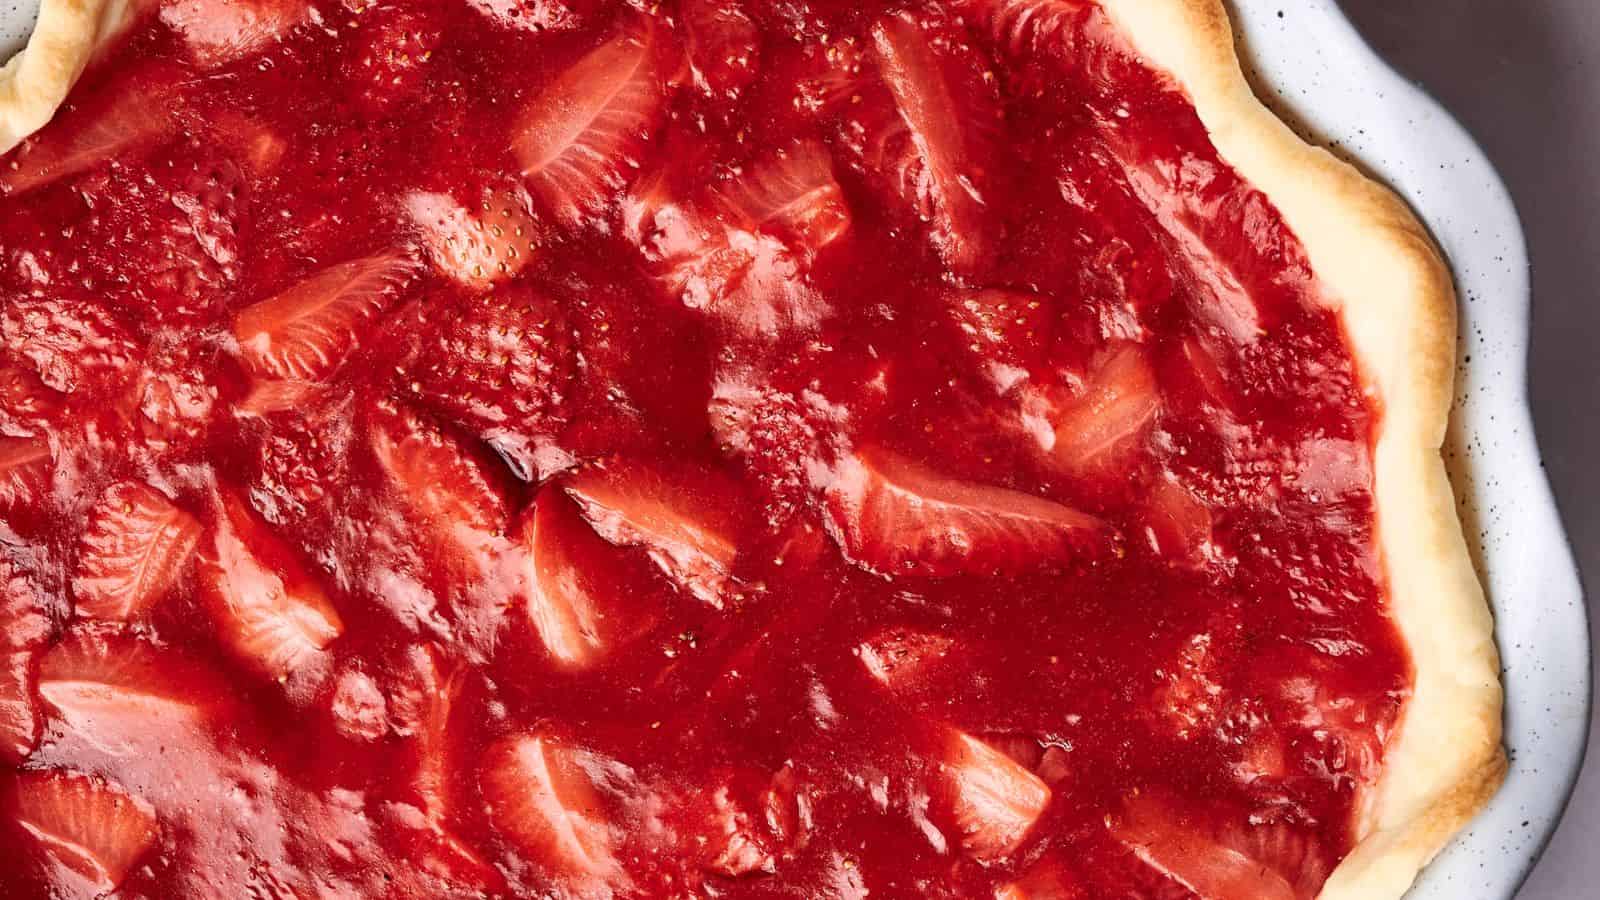 Close-up of a strawberry pizza featuring a thin crust topped with a layer of strawberry sauce and sliced strawberries, evoking the delightful appearance of a strawberry pie with its vibrant red color.